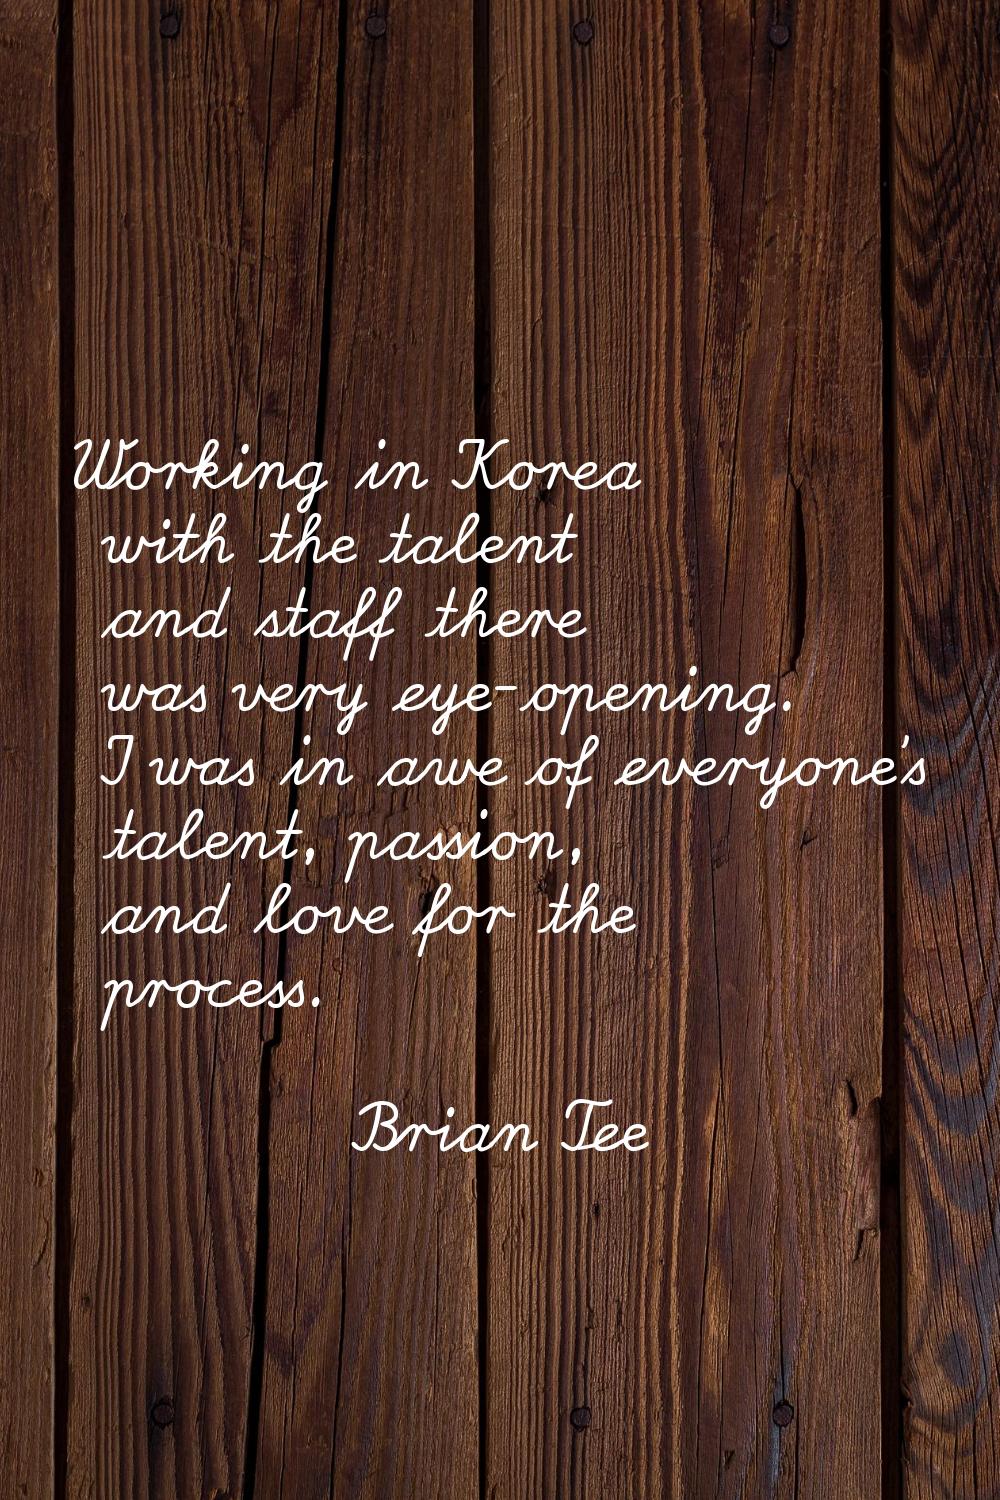 Working in Korea with the talent and staff there was very eye-opening. I was in awe of everyone's t